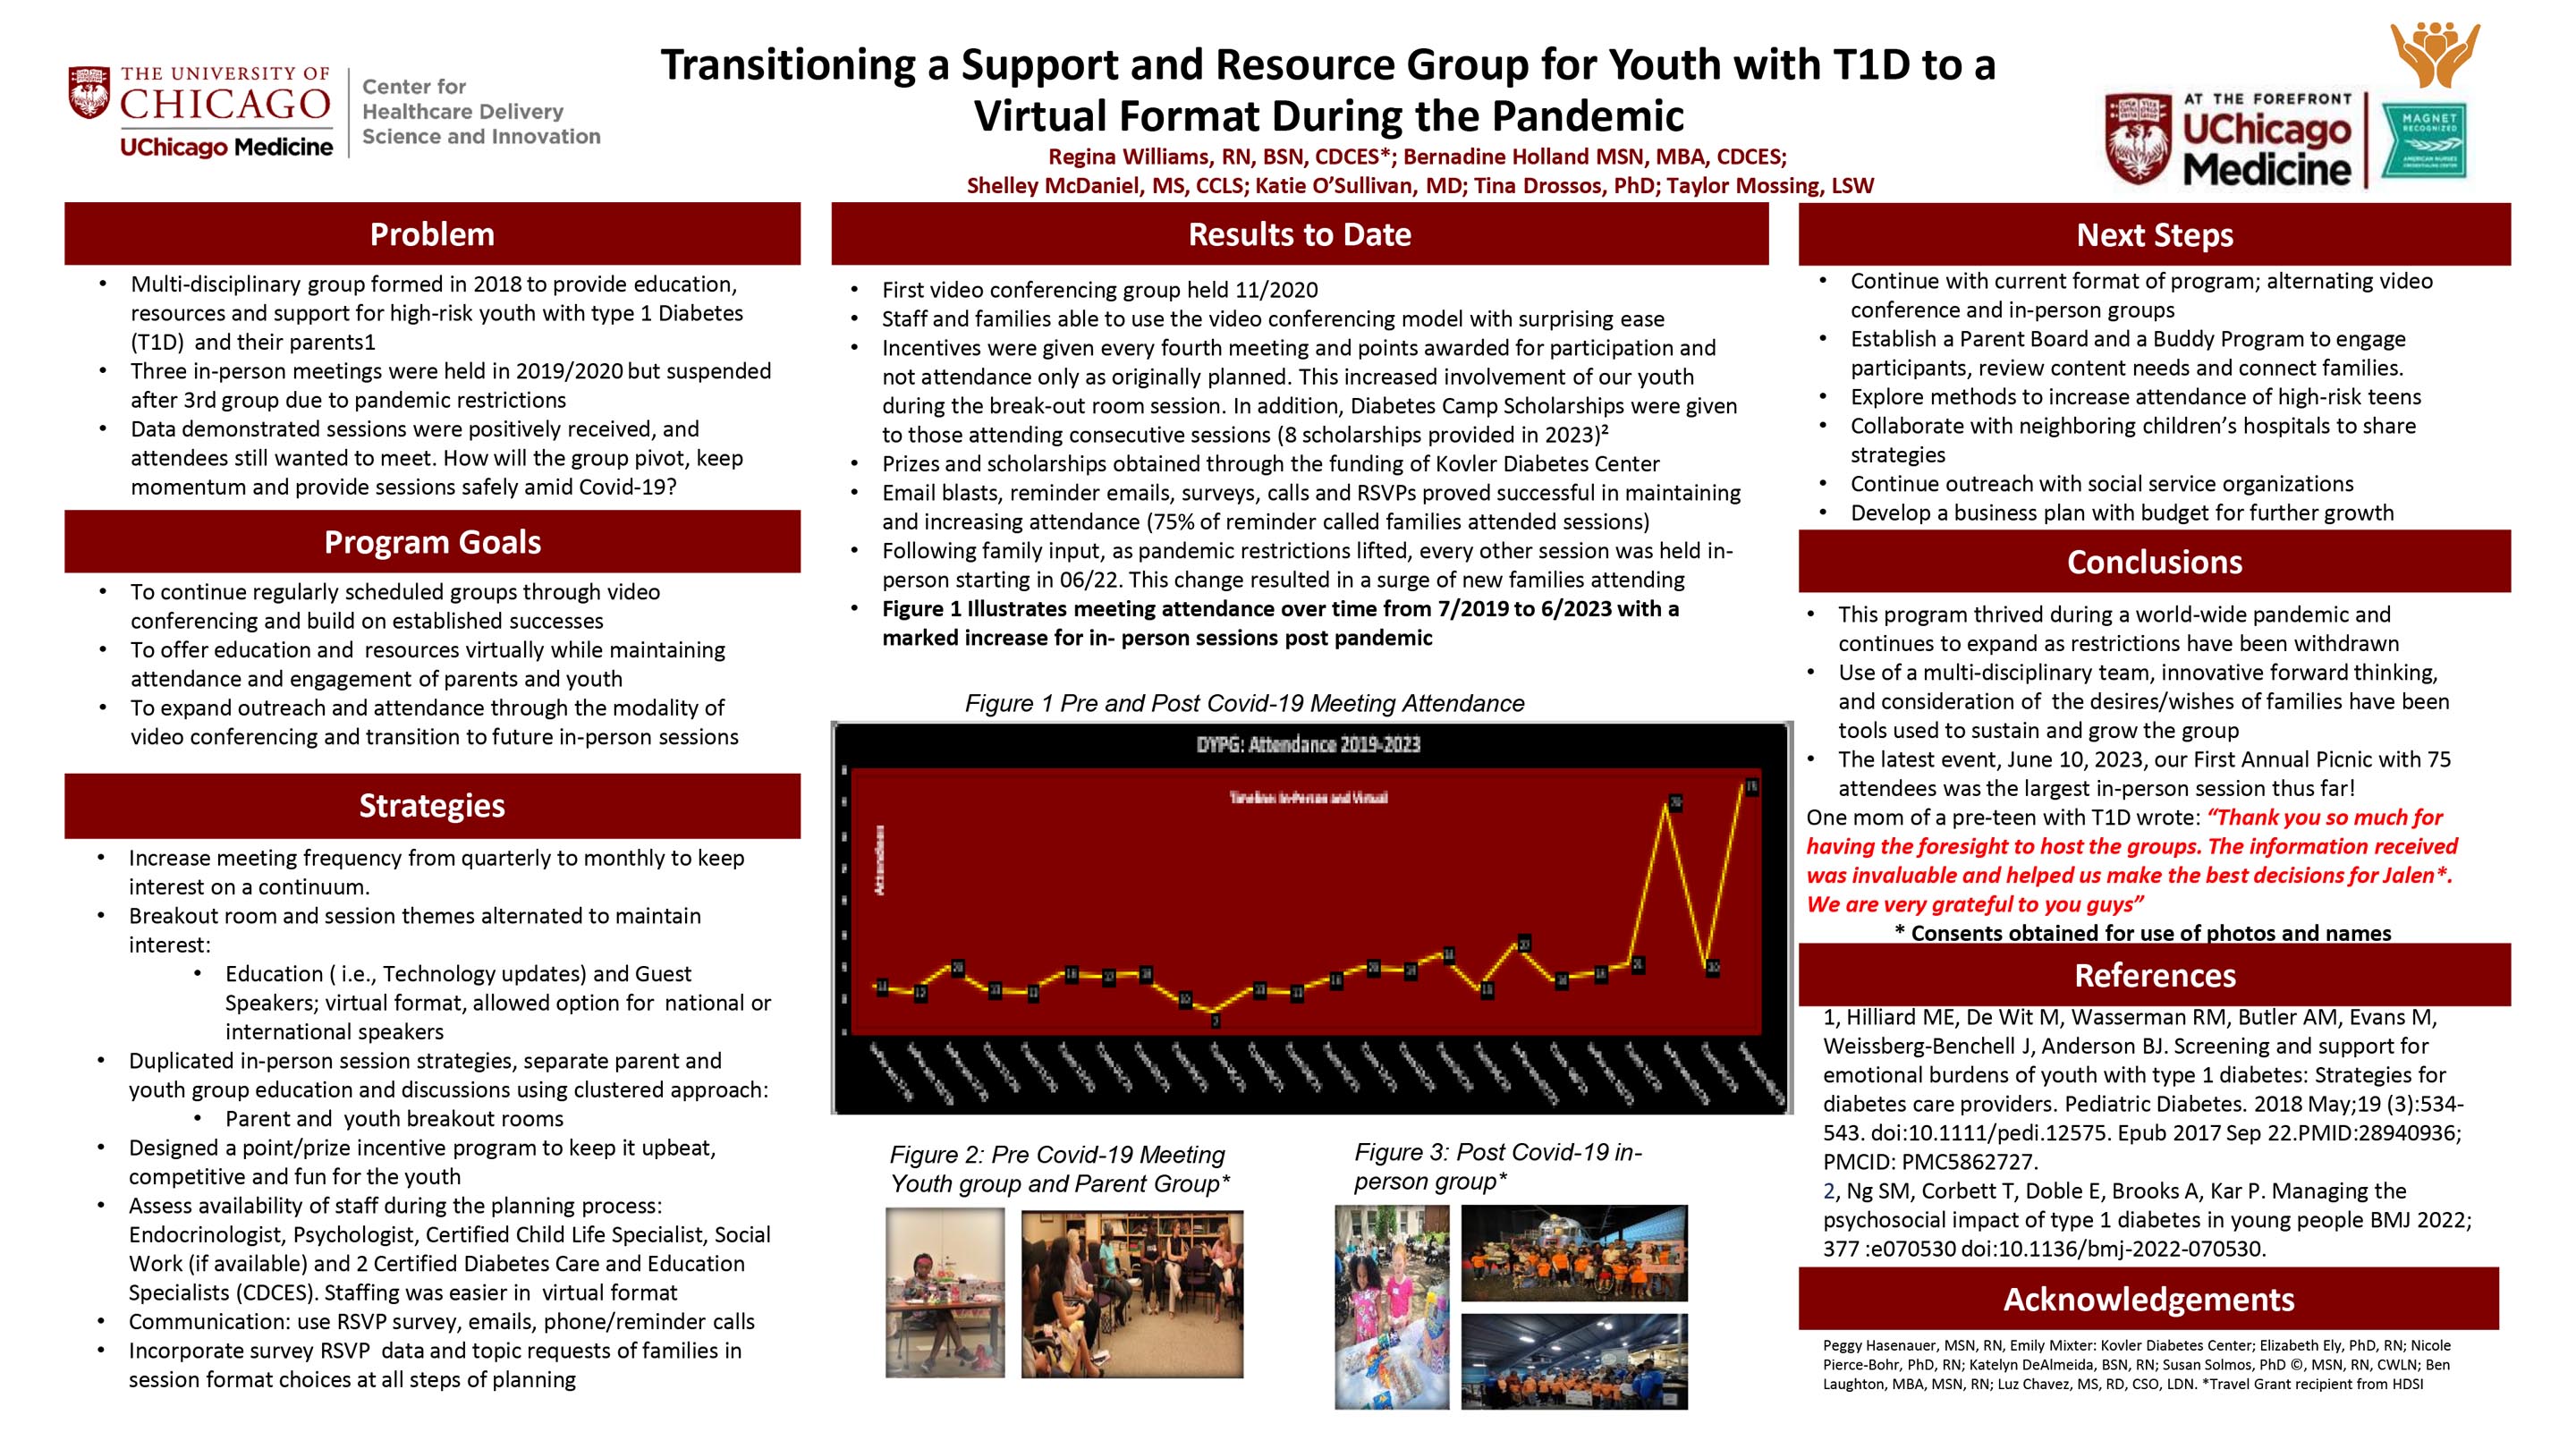 HOLLAND_Transitioning a Support and Resource Group for Youth with T1D to a Virtual Format during the Pandemic